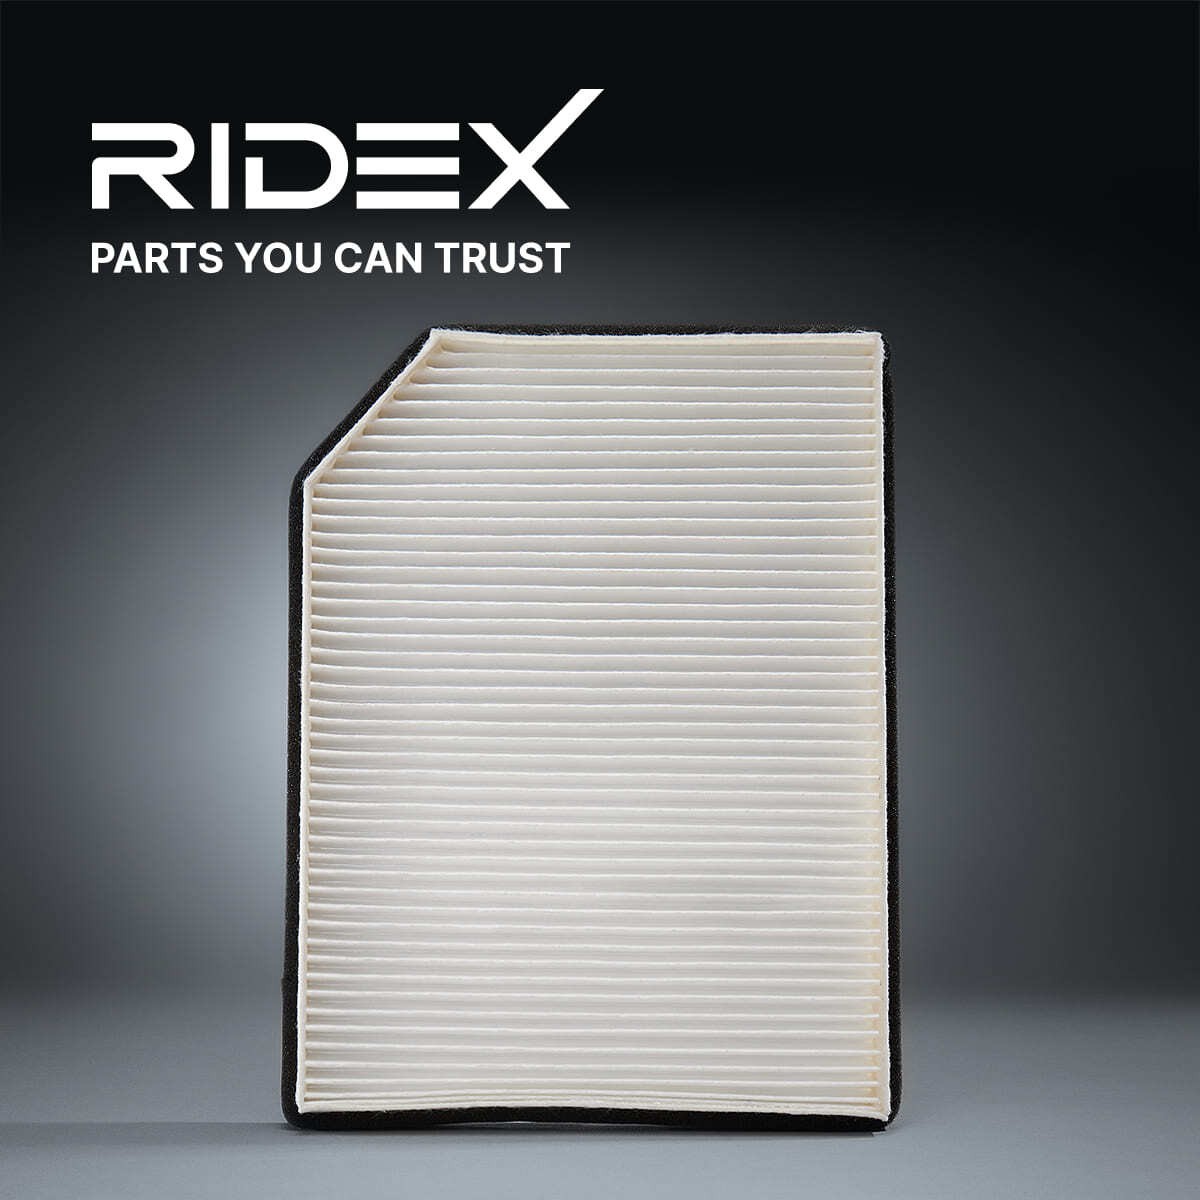 RIDEX 424I0192 Air conditioner filter Activated Carbon Filter, 254 mm x 134,0 mm x 41 mm